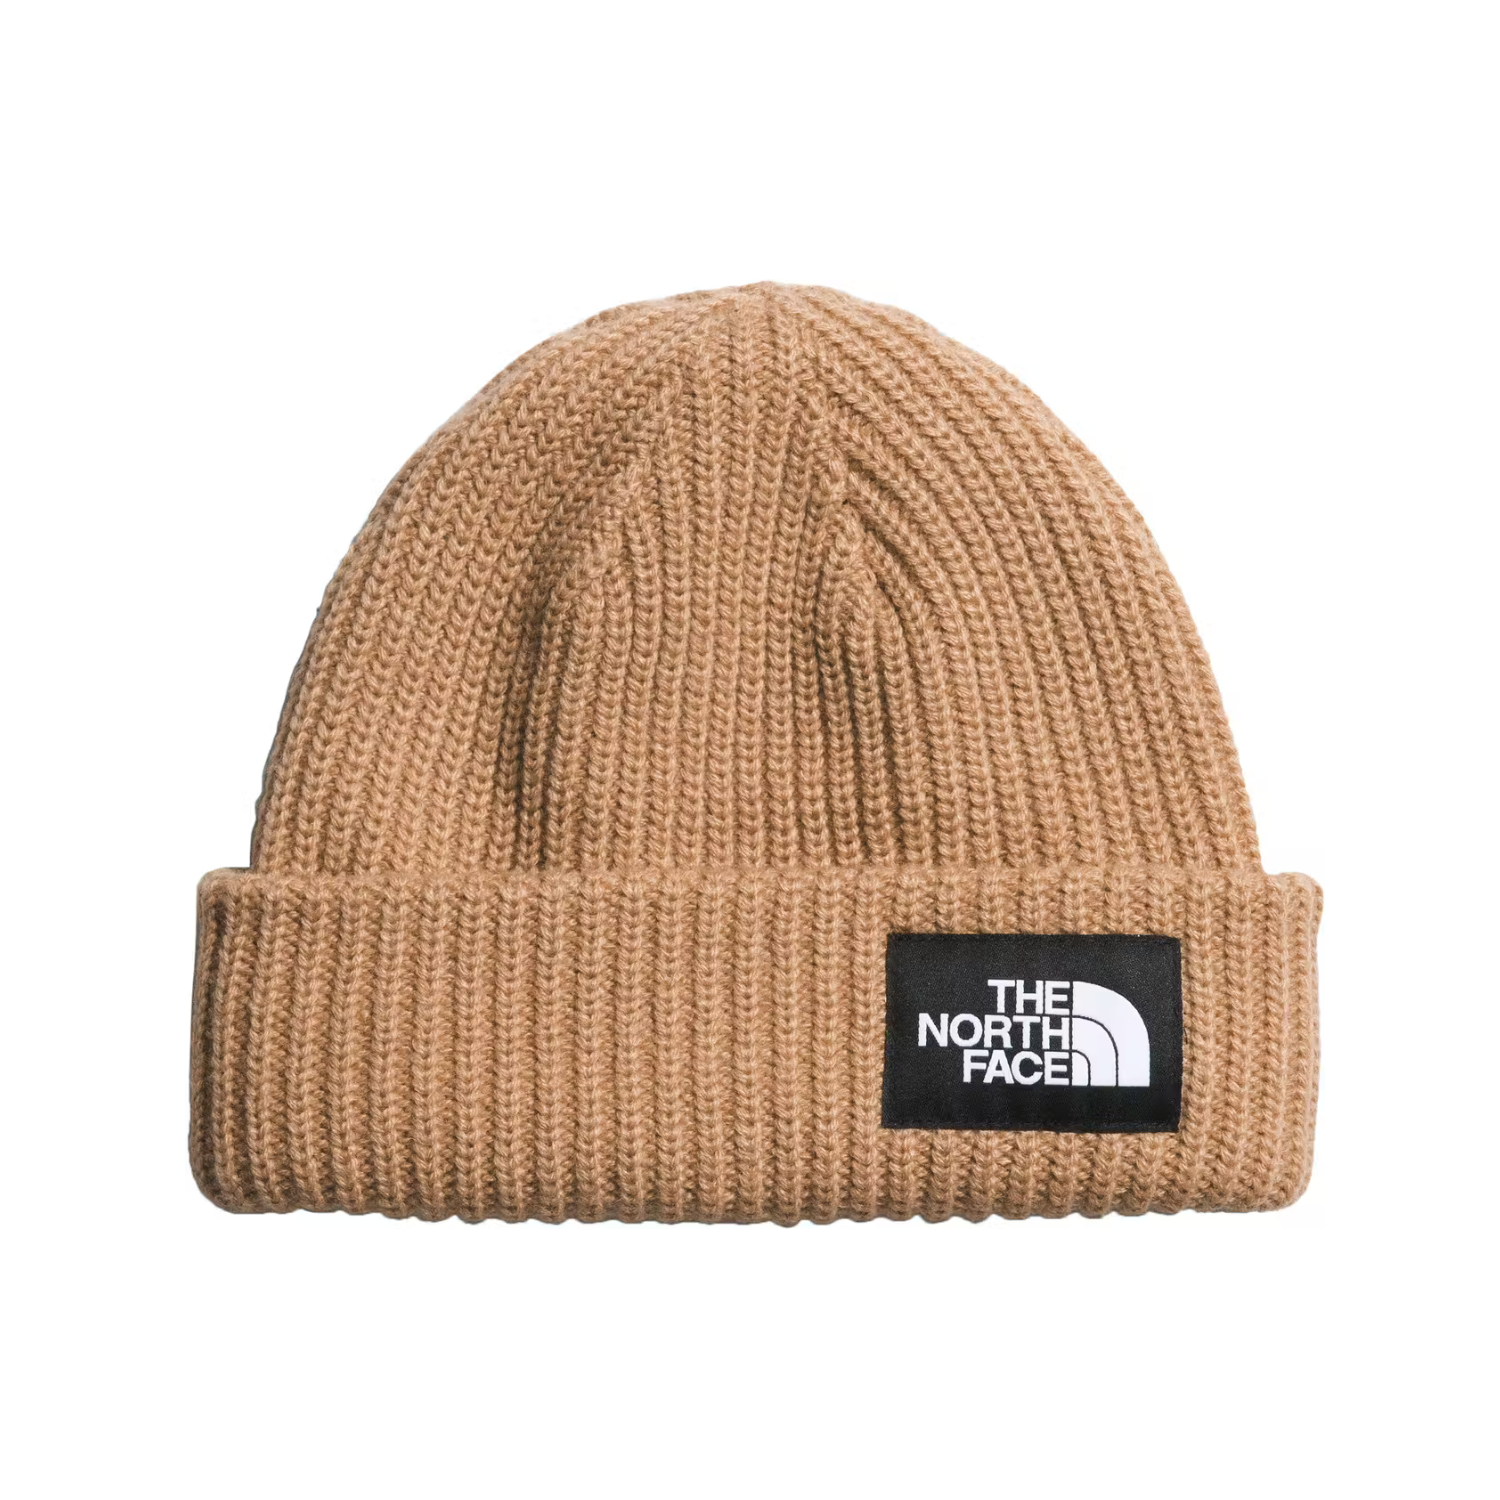 SALTY LINED BEANIE - ALMOND BUTTER